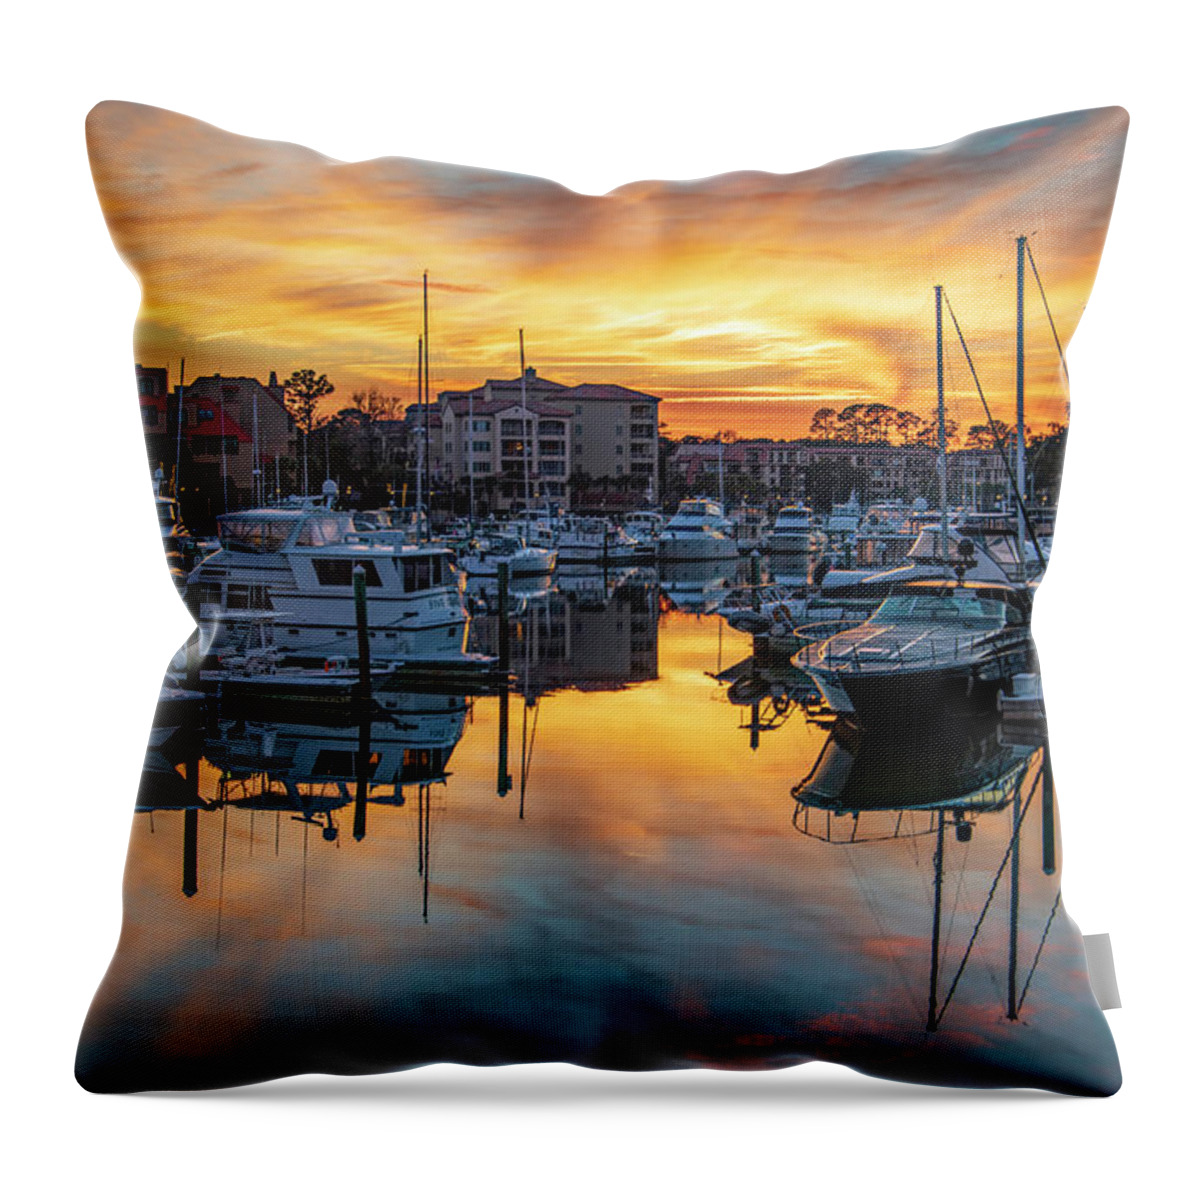 Shelter Cove Harbour & Marina Throw Pillow featuring the photograph Shelter Cove Harbour by Allen Carroll